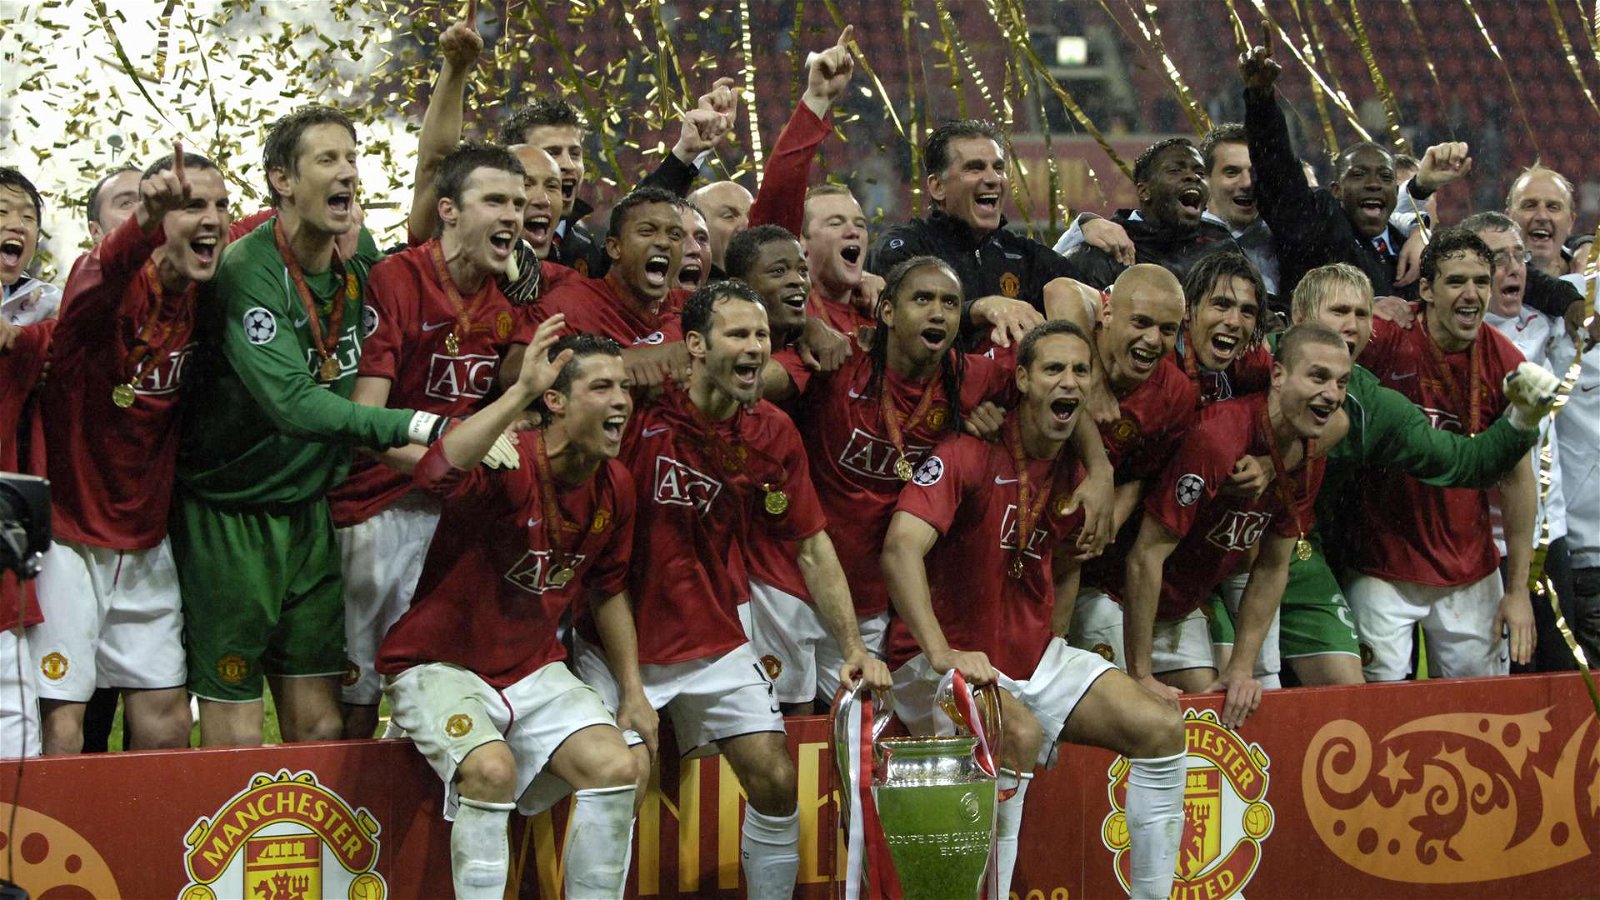 English teams with most Champions League trophies (wins & titles)